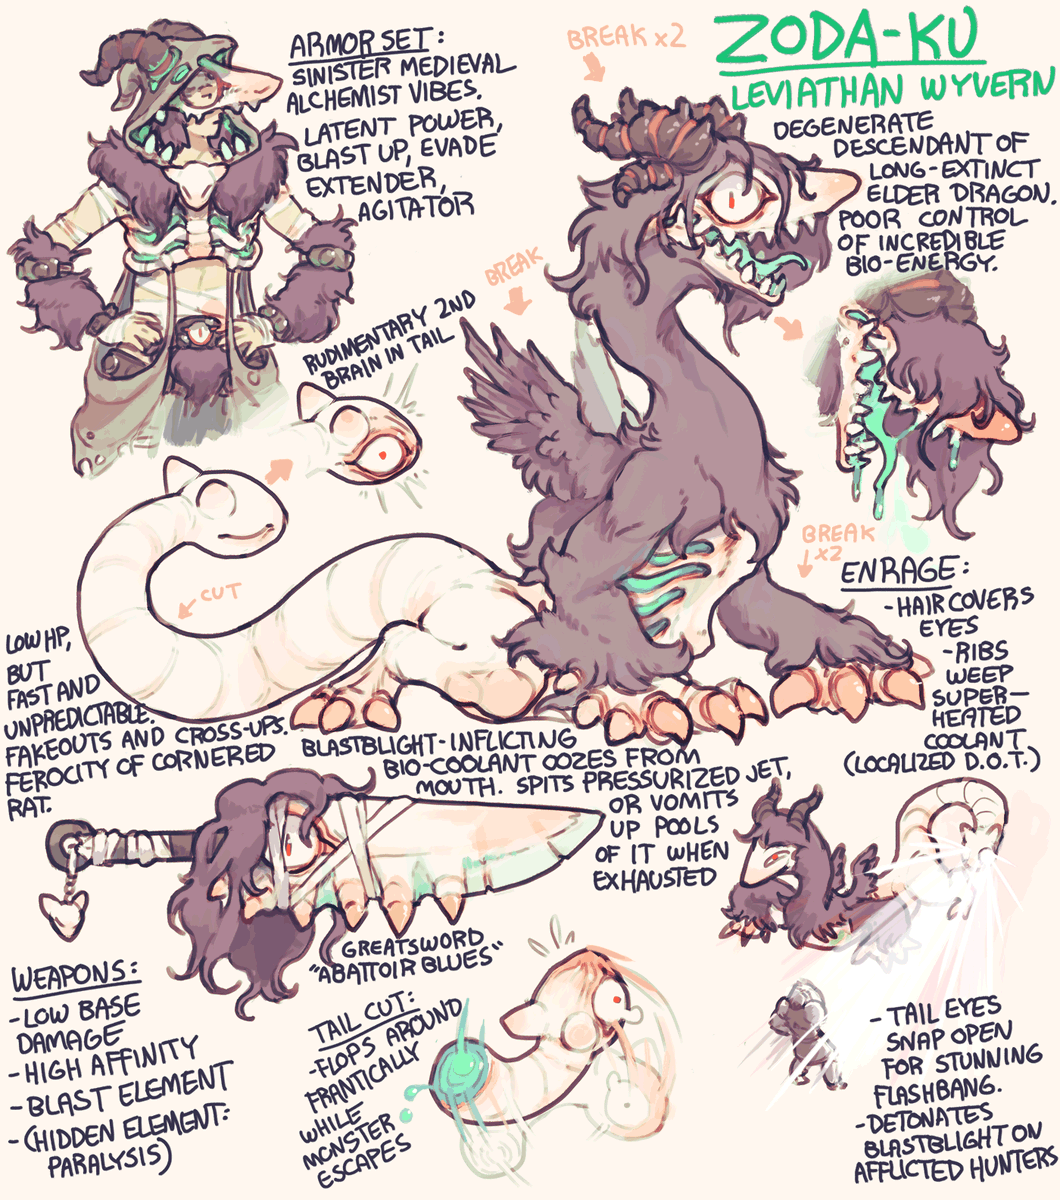 the sona as a monster hunter hunt. had way too much fun putting this together.